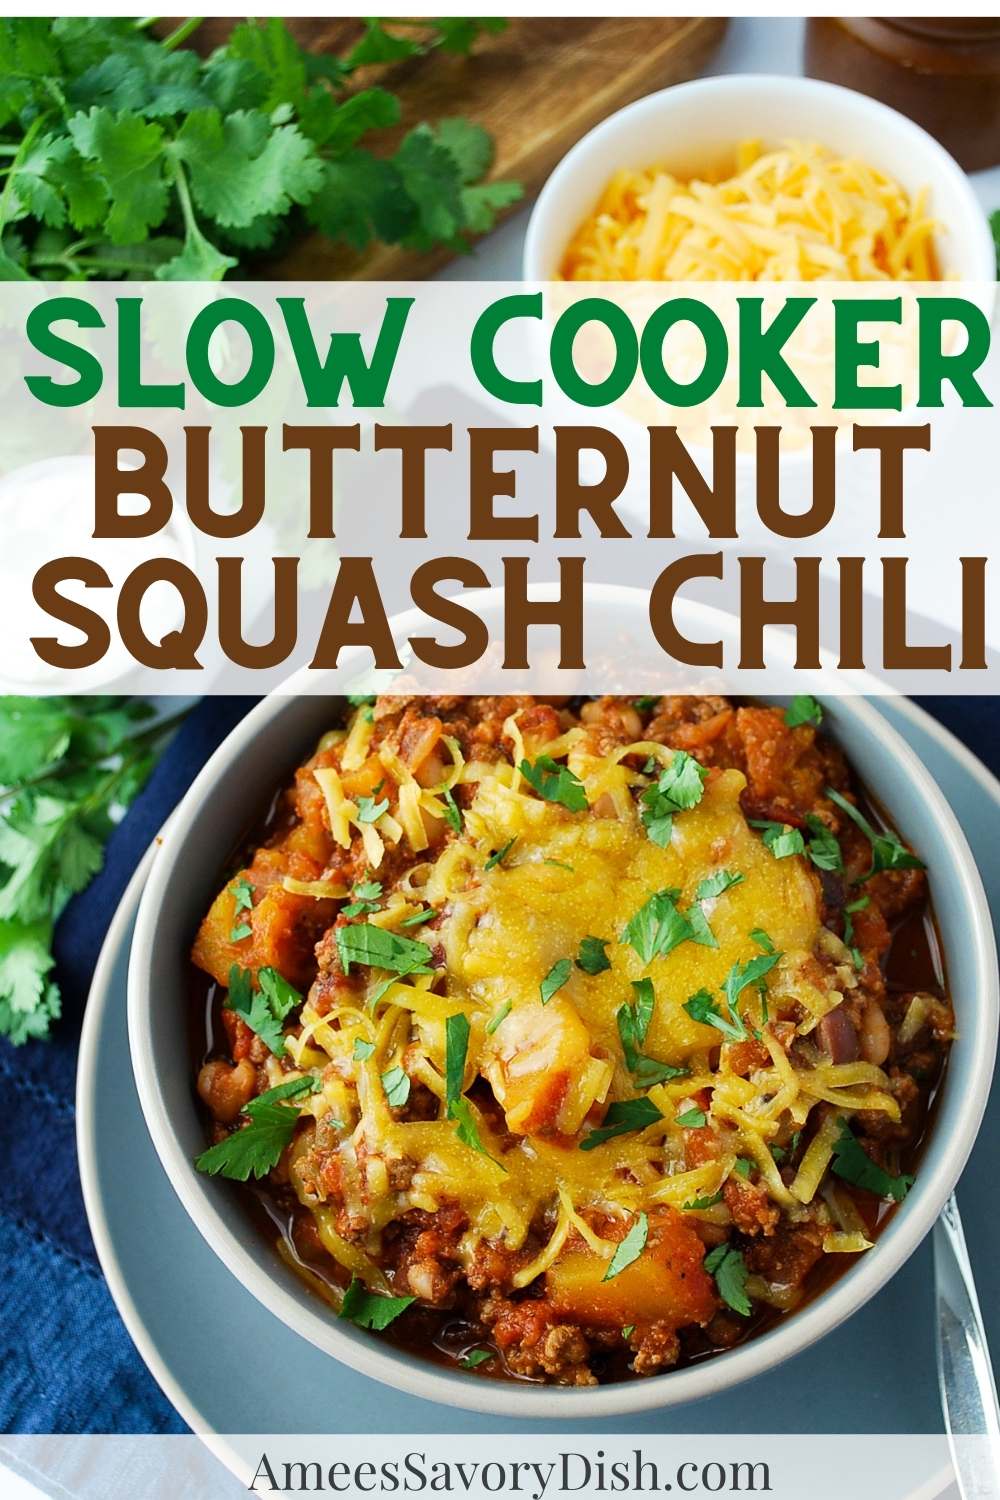 Warm-up with a bowl of healthy and hearty Slow Cooker Butternut Squash Chili. Naturally sweet and creamy butternut squash, ground beef, and various beans cooked low and slow to make a delicious chili-style stew. via @Ameessavorydish